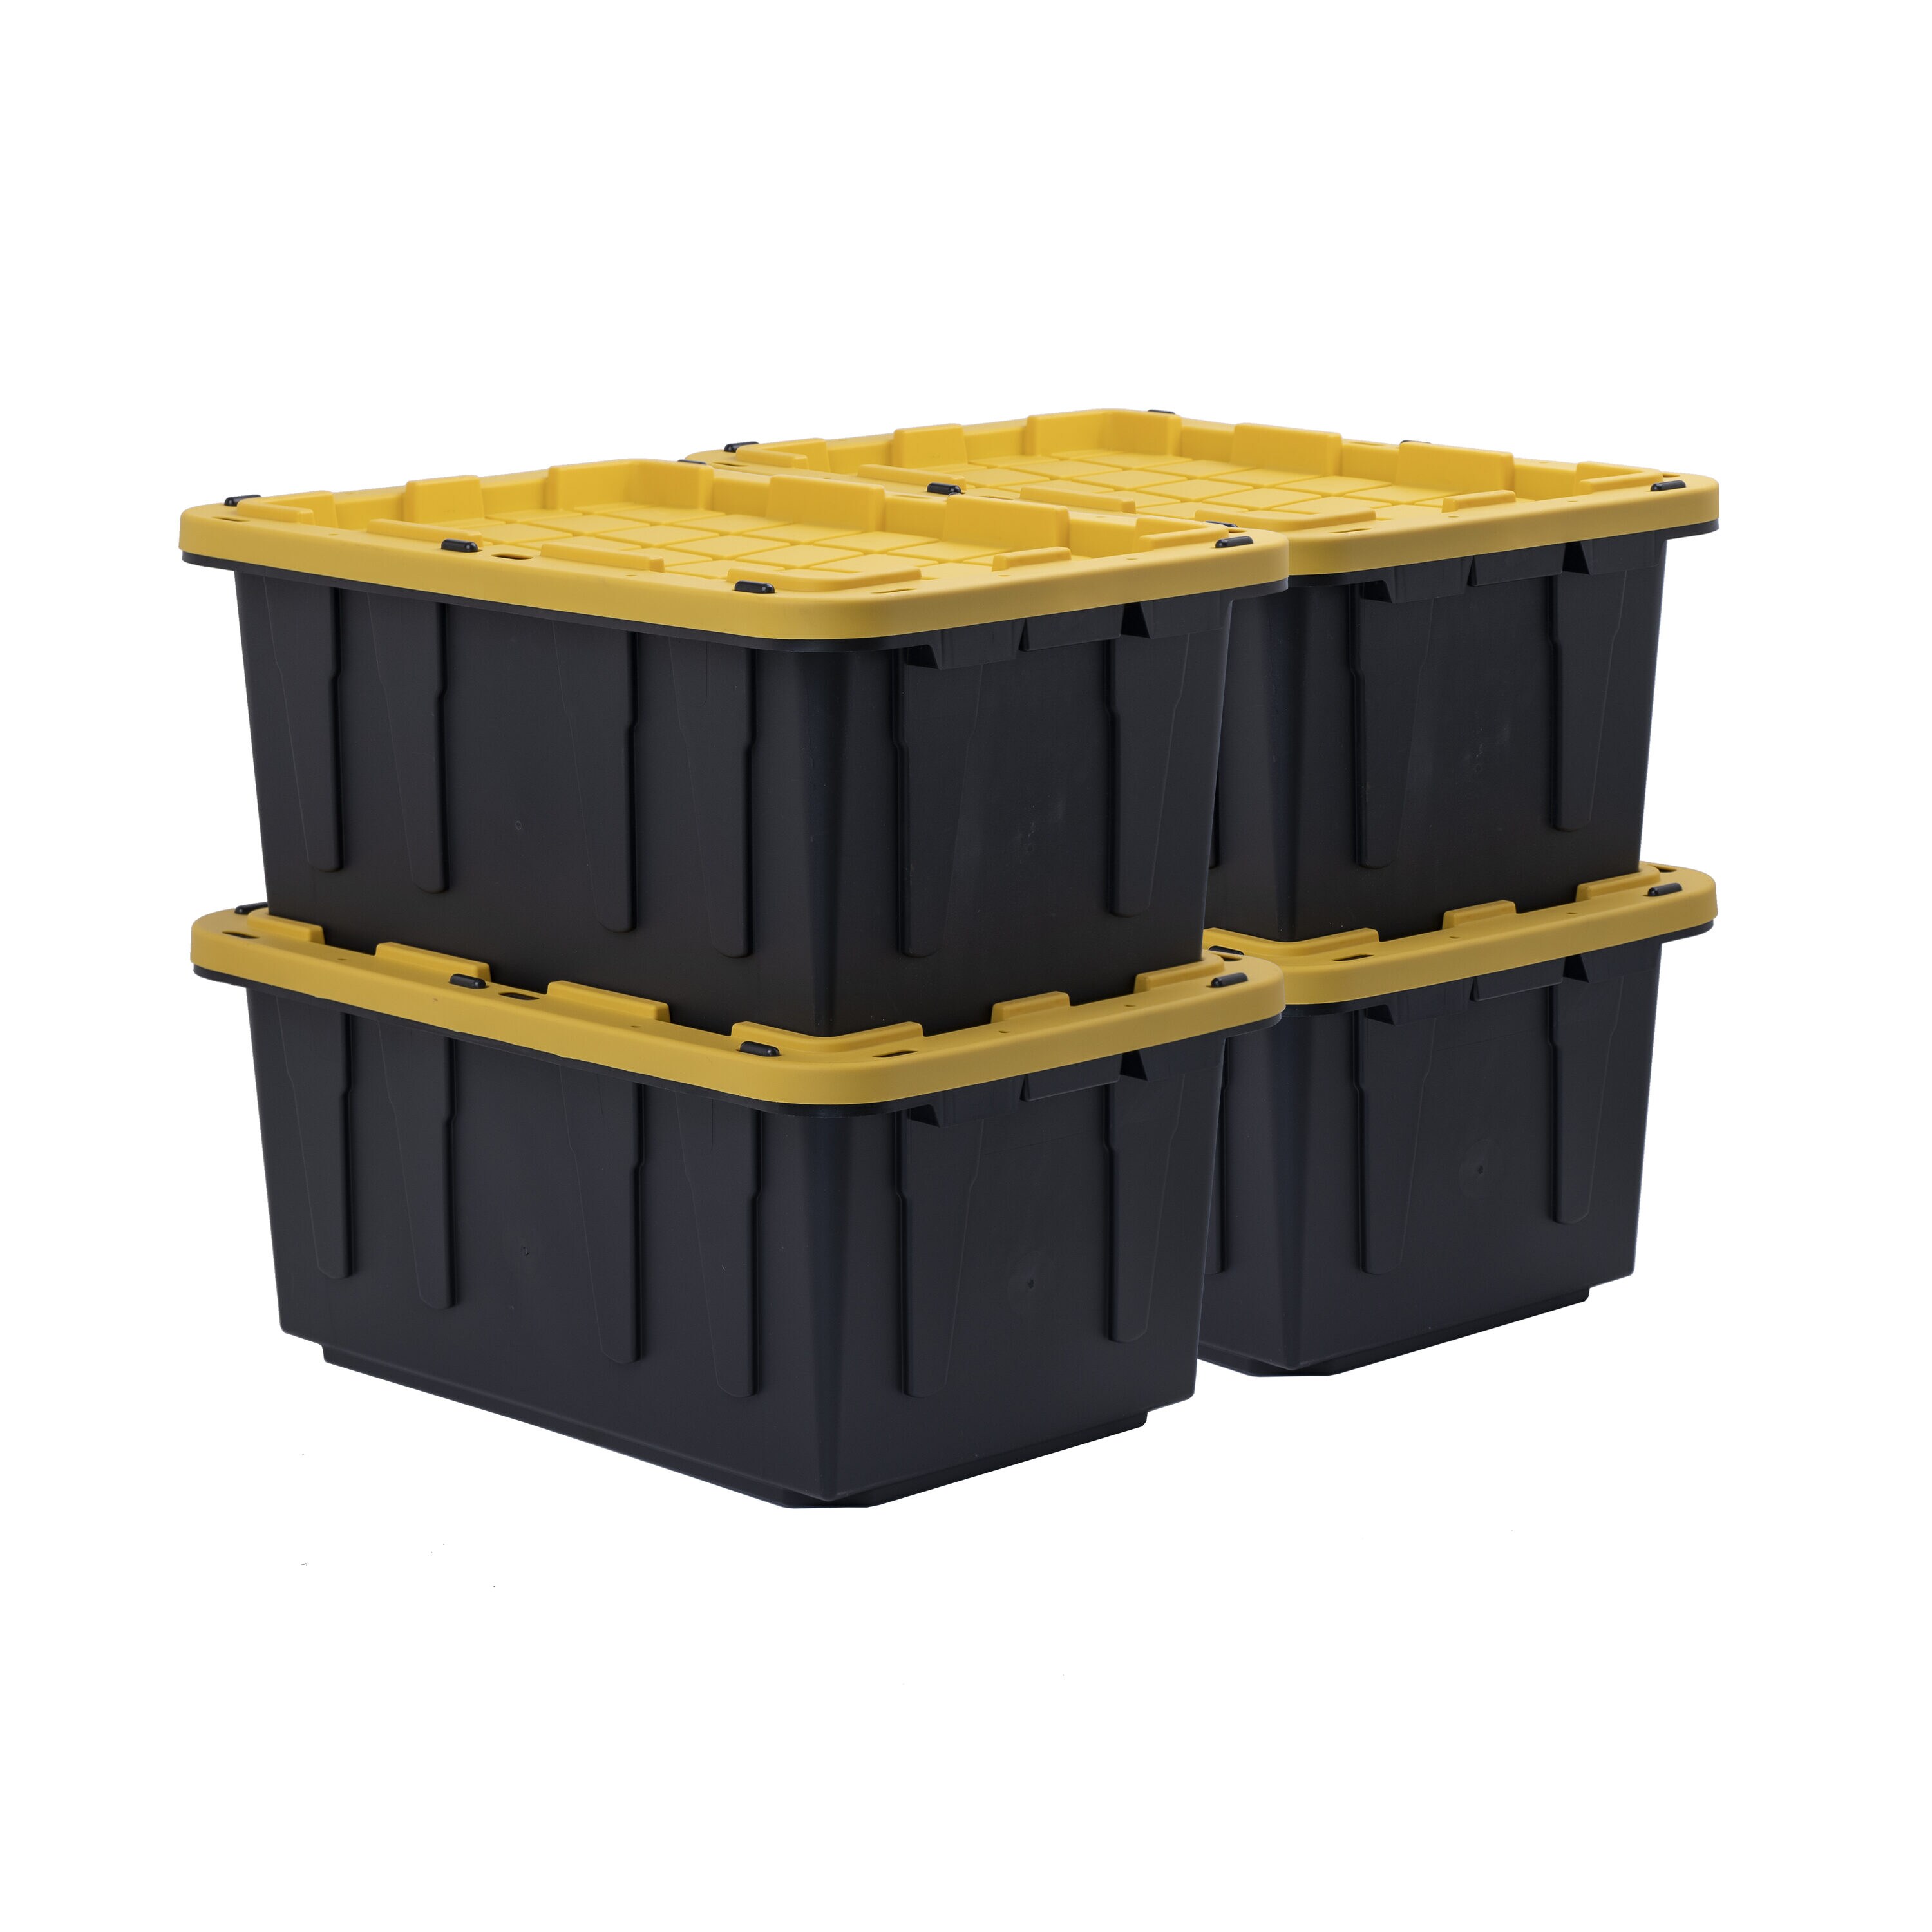 Shop Project Source 4-Pack Project Source Commander Large 27-Gallons  (108-Quart) Black and Yellow Heavy Duty Tote with snap lid at